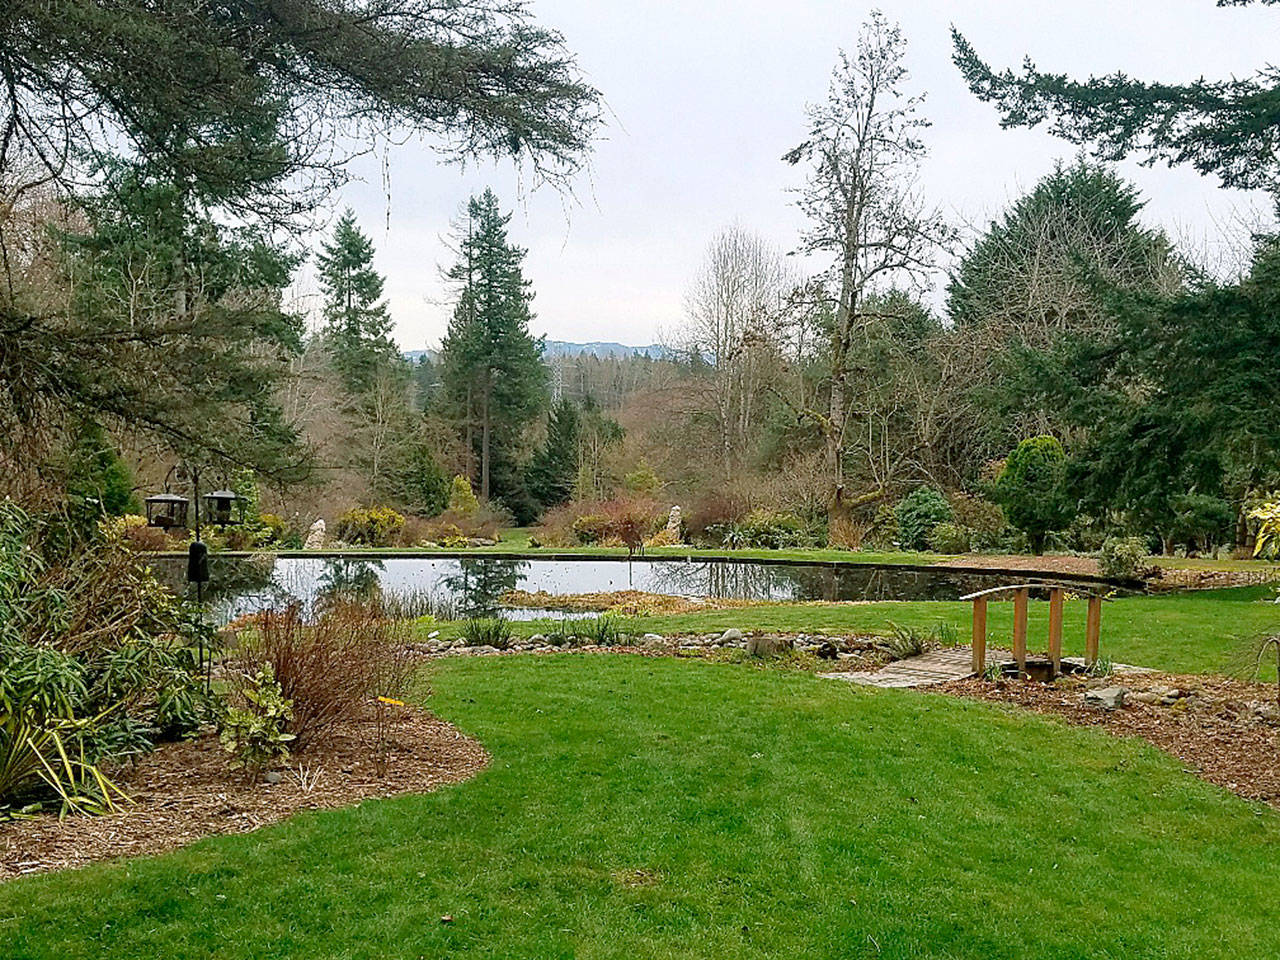 Soos Creek Botanical Garden & Heritage Center, which opens for the season on Wednesday, April 4, offers 22 acres of strolling gardens and a center that showcases local history and other amenities. COURTESY PHOTO